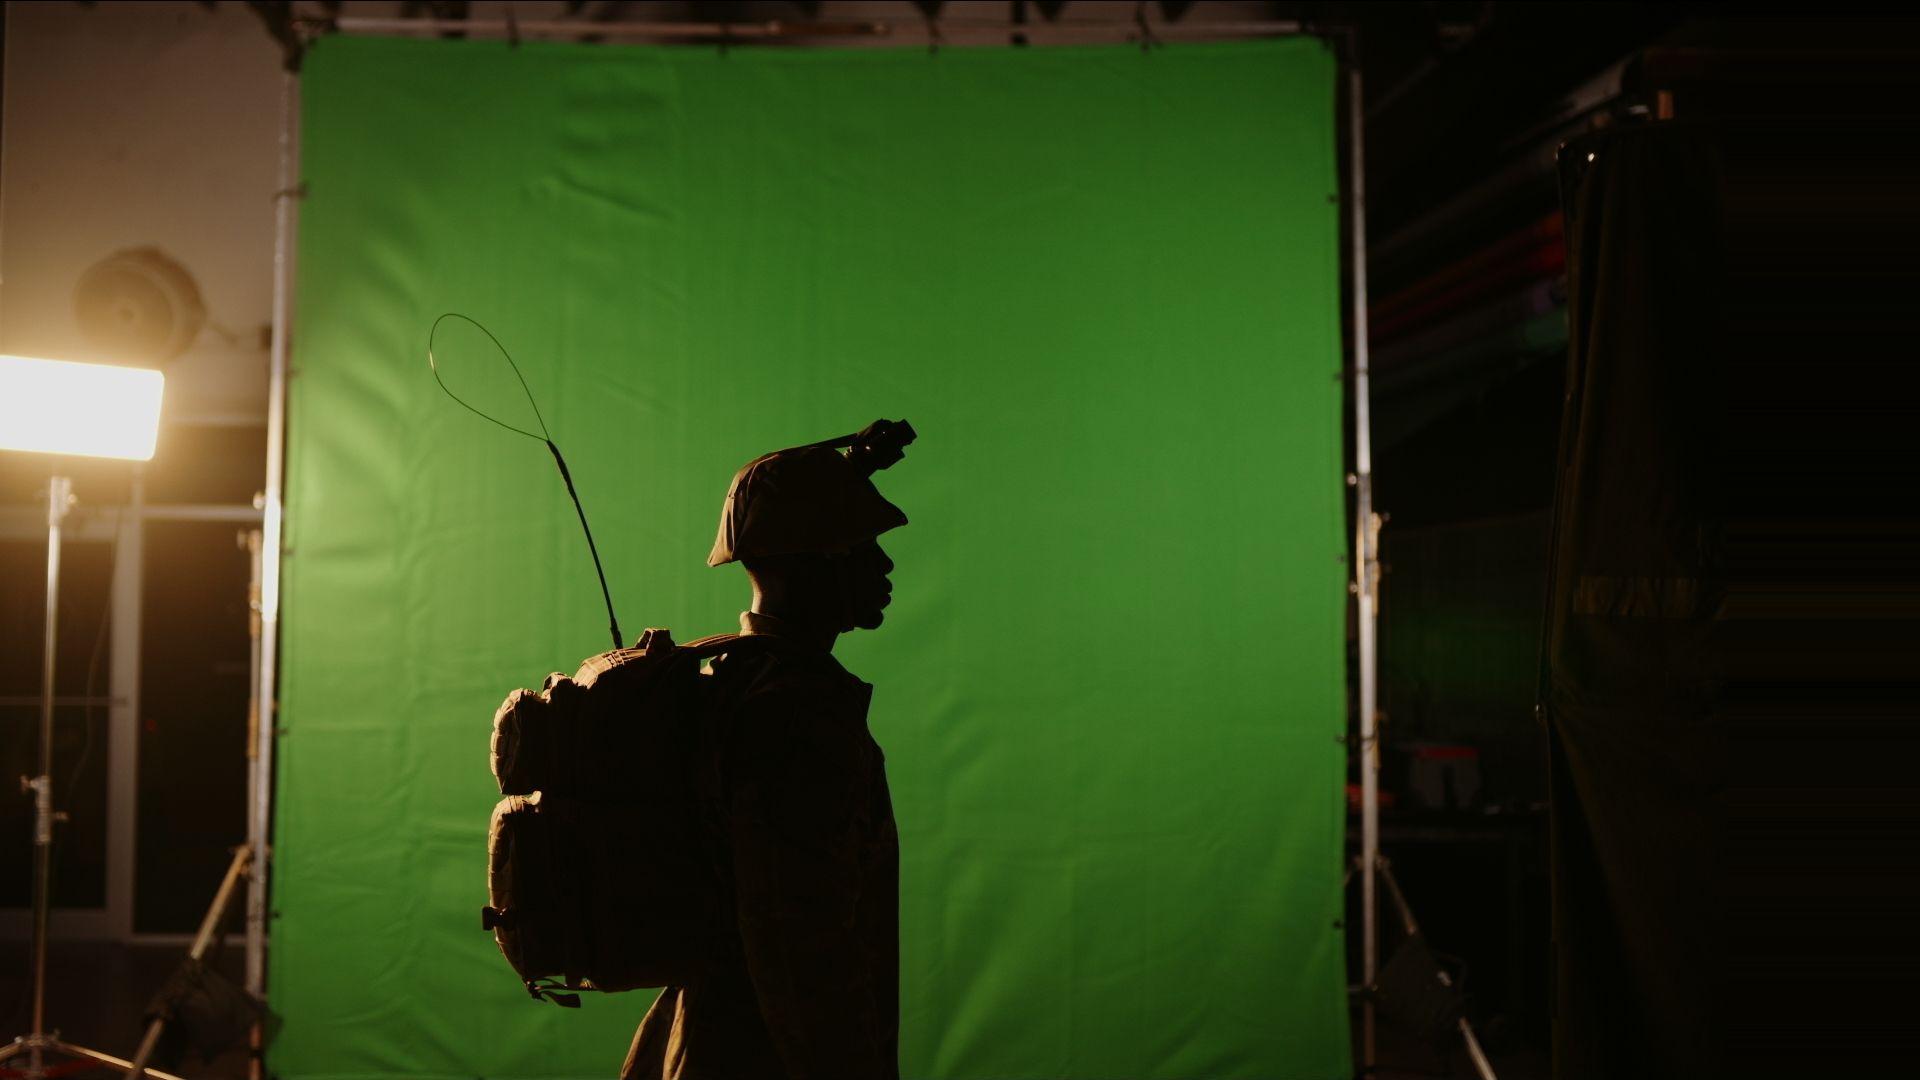 The versatility of a green screen in film production and where to find a professional video company that has one Side profile silhouette of a solder wearing gear in front of a green backdrop in a studio